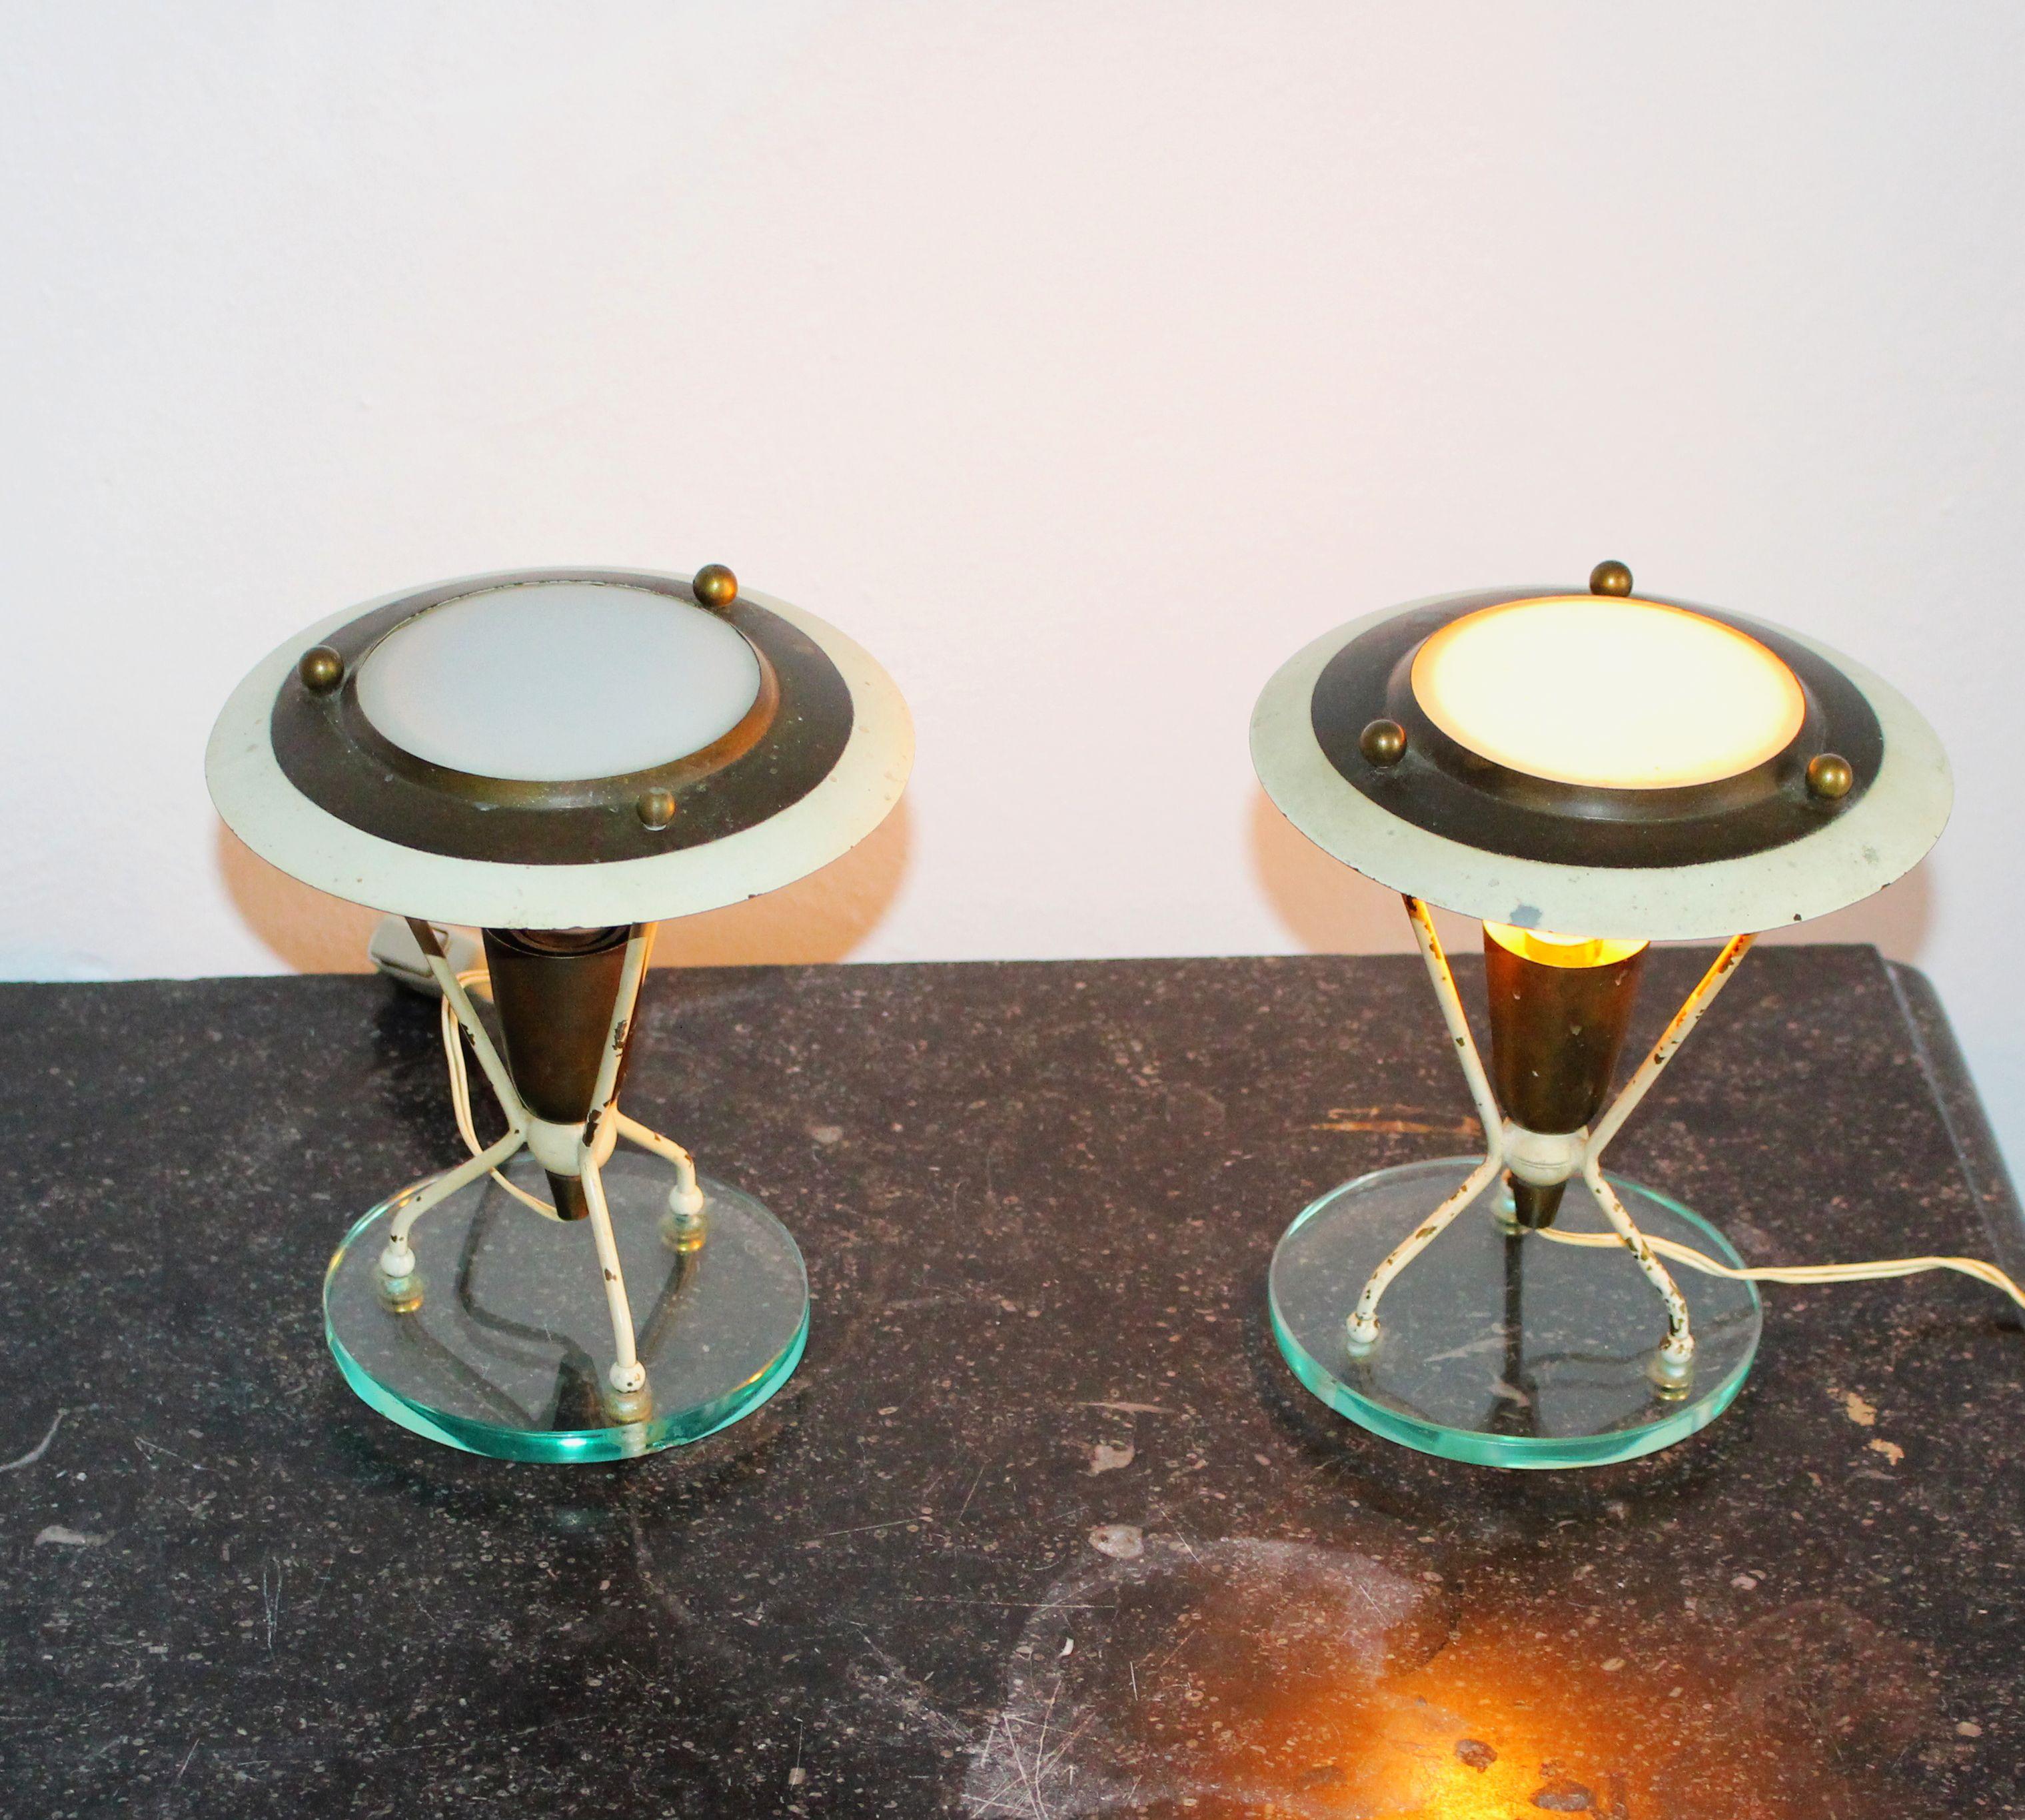 Italian table lamps period 1950s. Brass and glass base. Lamps are from the period and they are in the original condition as presented.
 